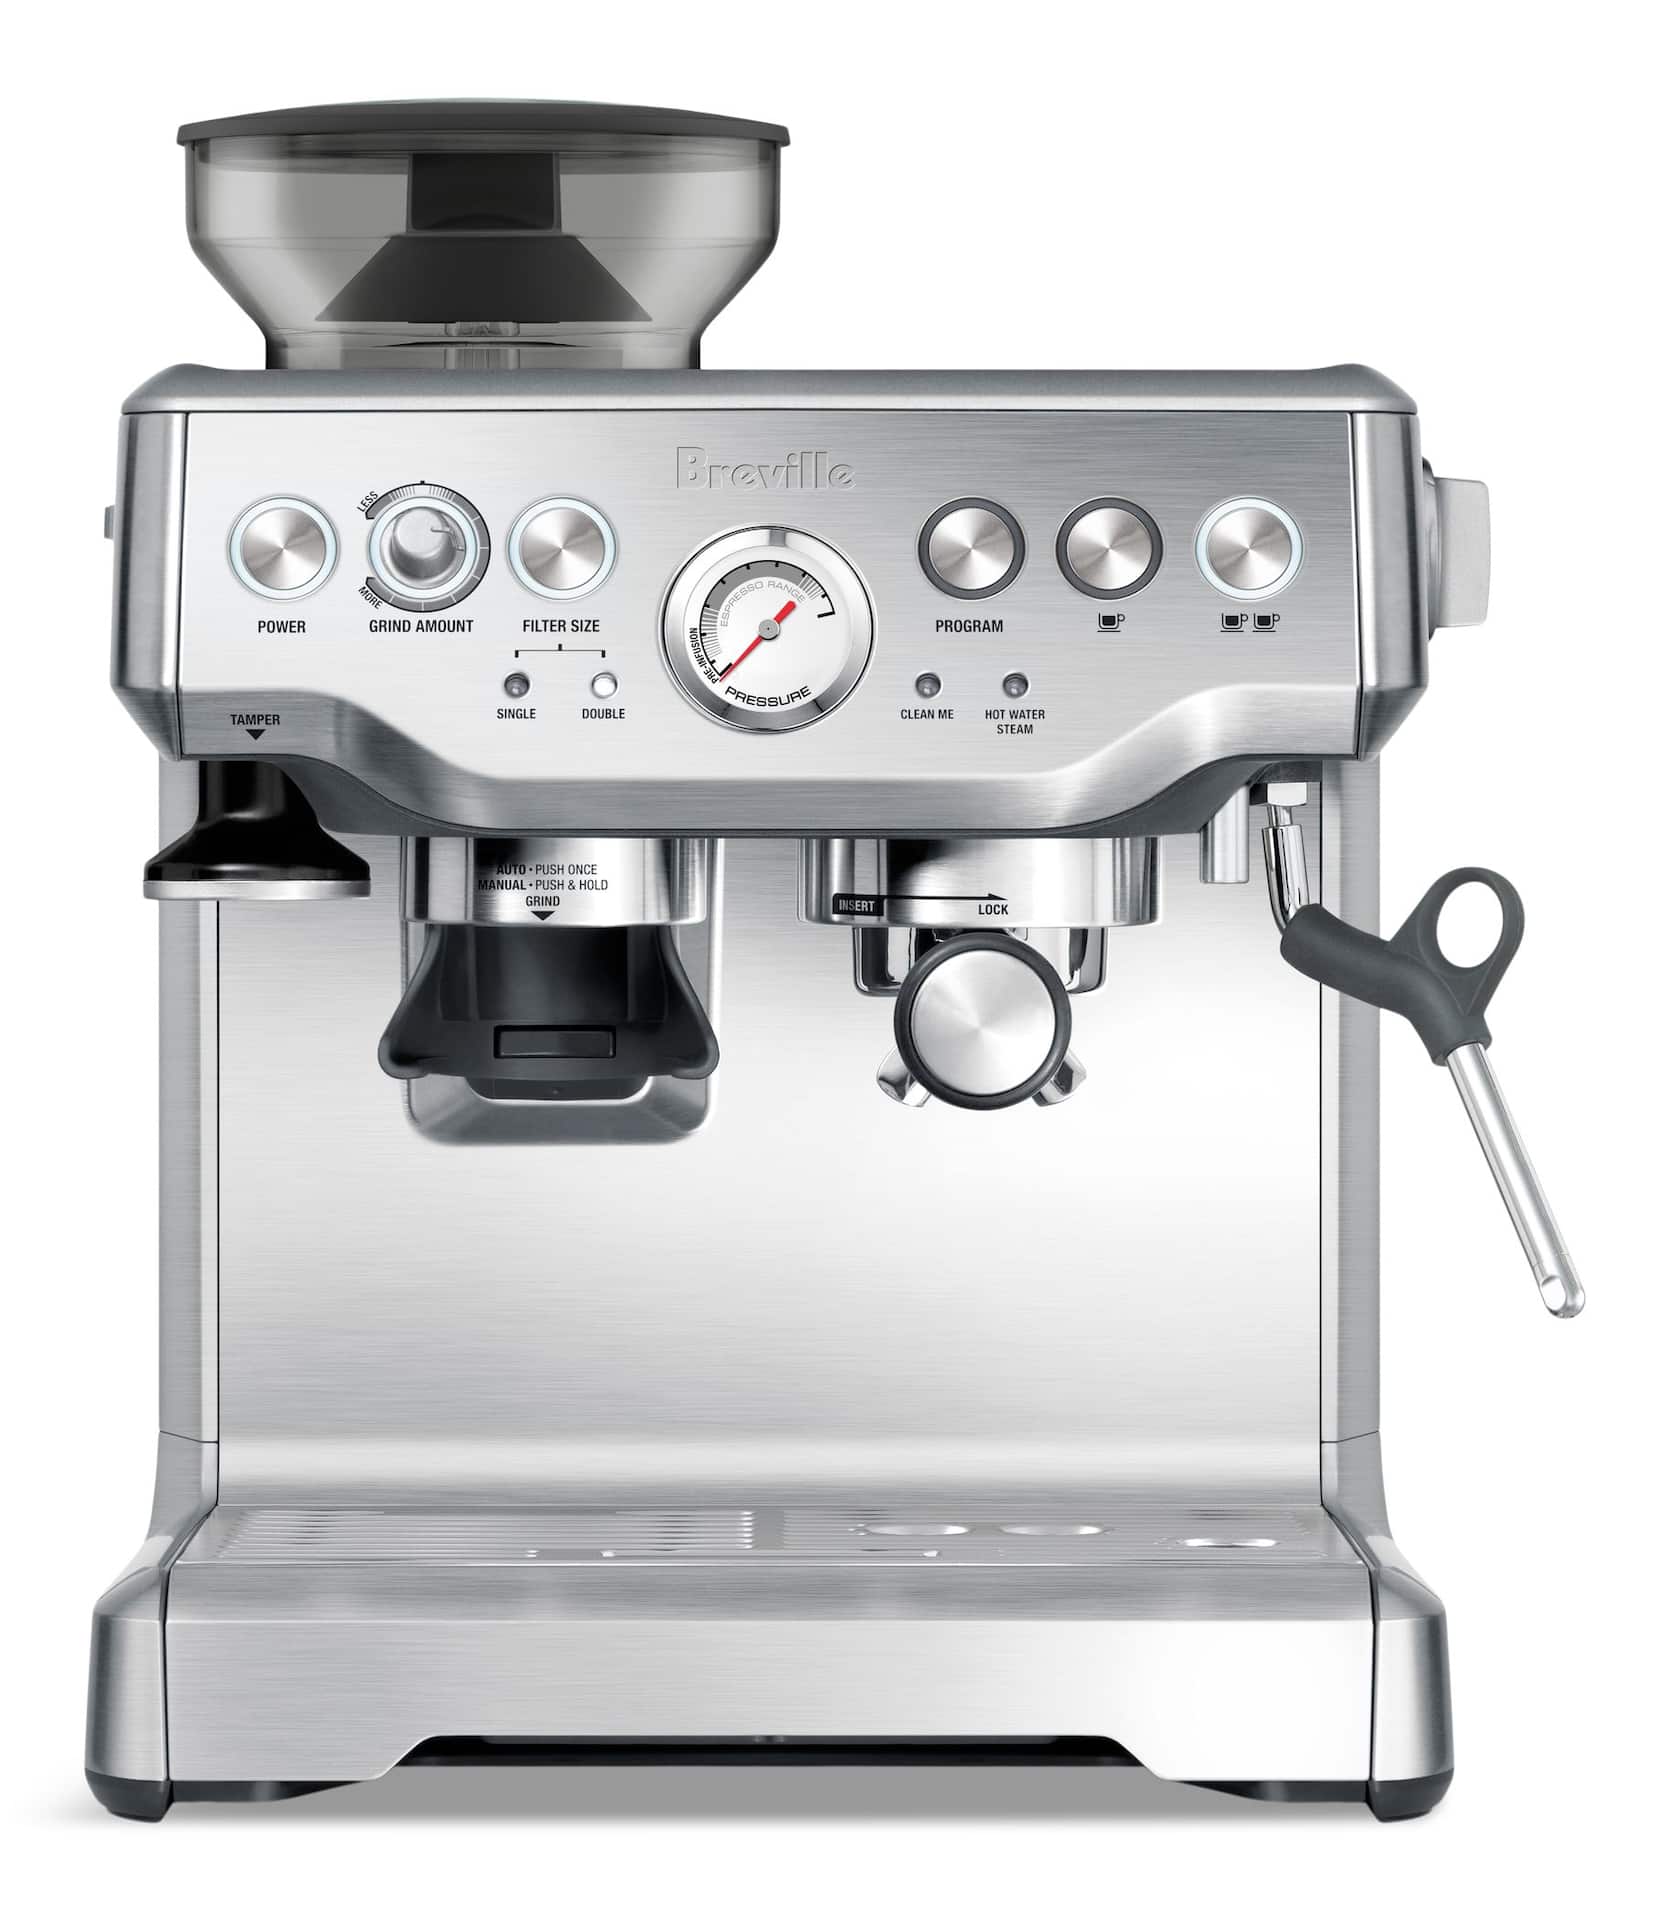 Barista Expresso Semi-Automatic Espresso Machine with Integrated Conical Burr Grinder, BES870BSS, Brushed Stainless Steel Breville